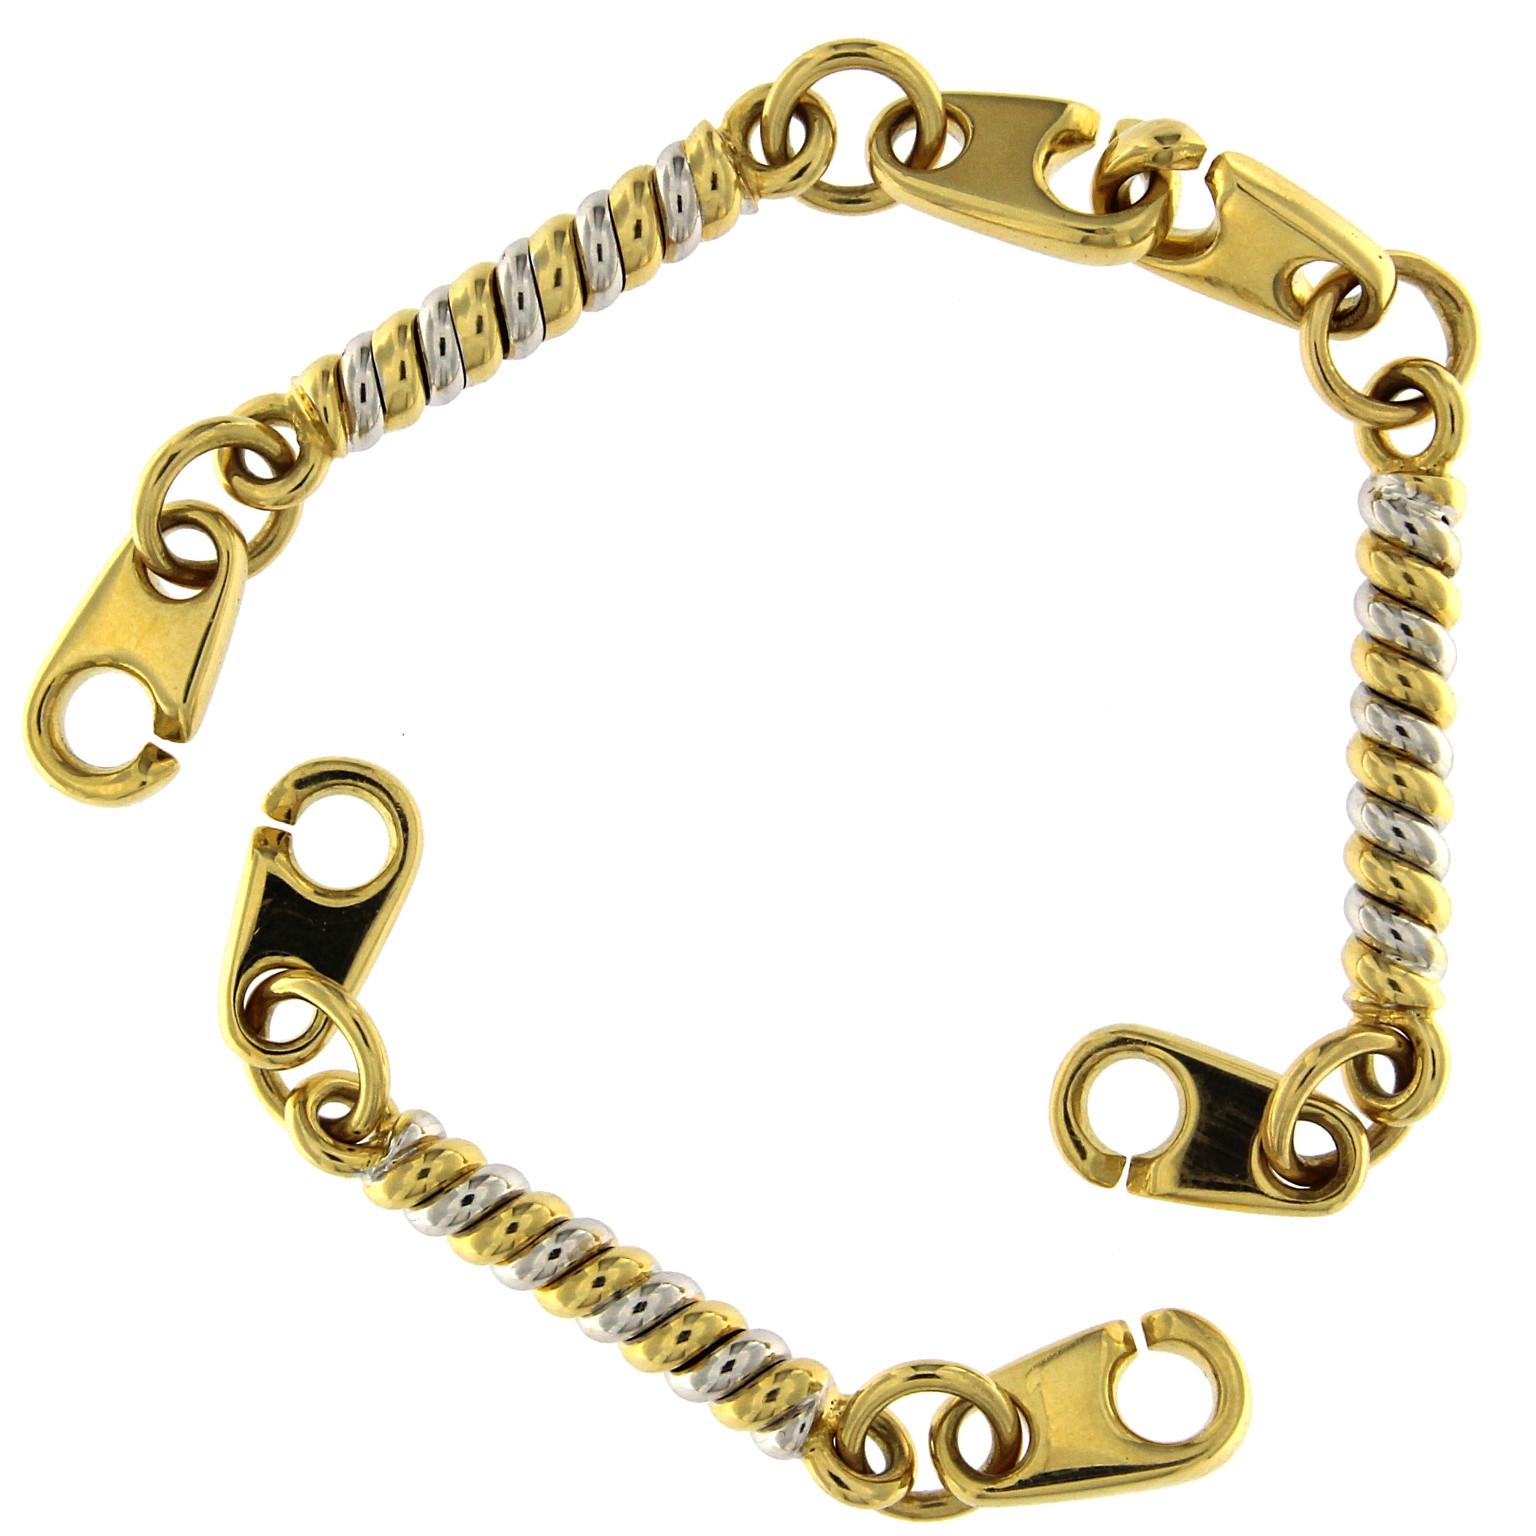 Unusual design chain bracelet with great visual effect in Yellow gold with white and yellow twisted elements links.
Total weight of  gold 18 kt gr 28.00
Stamp 750

